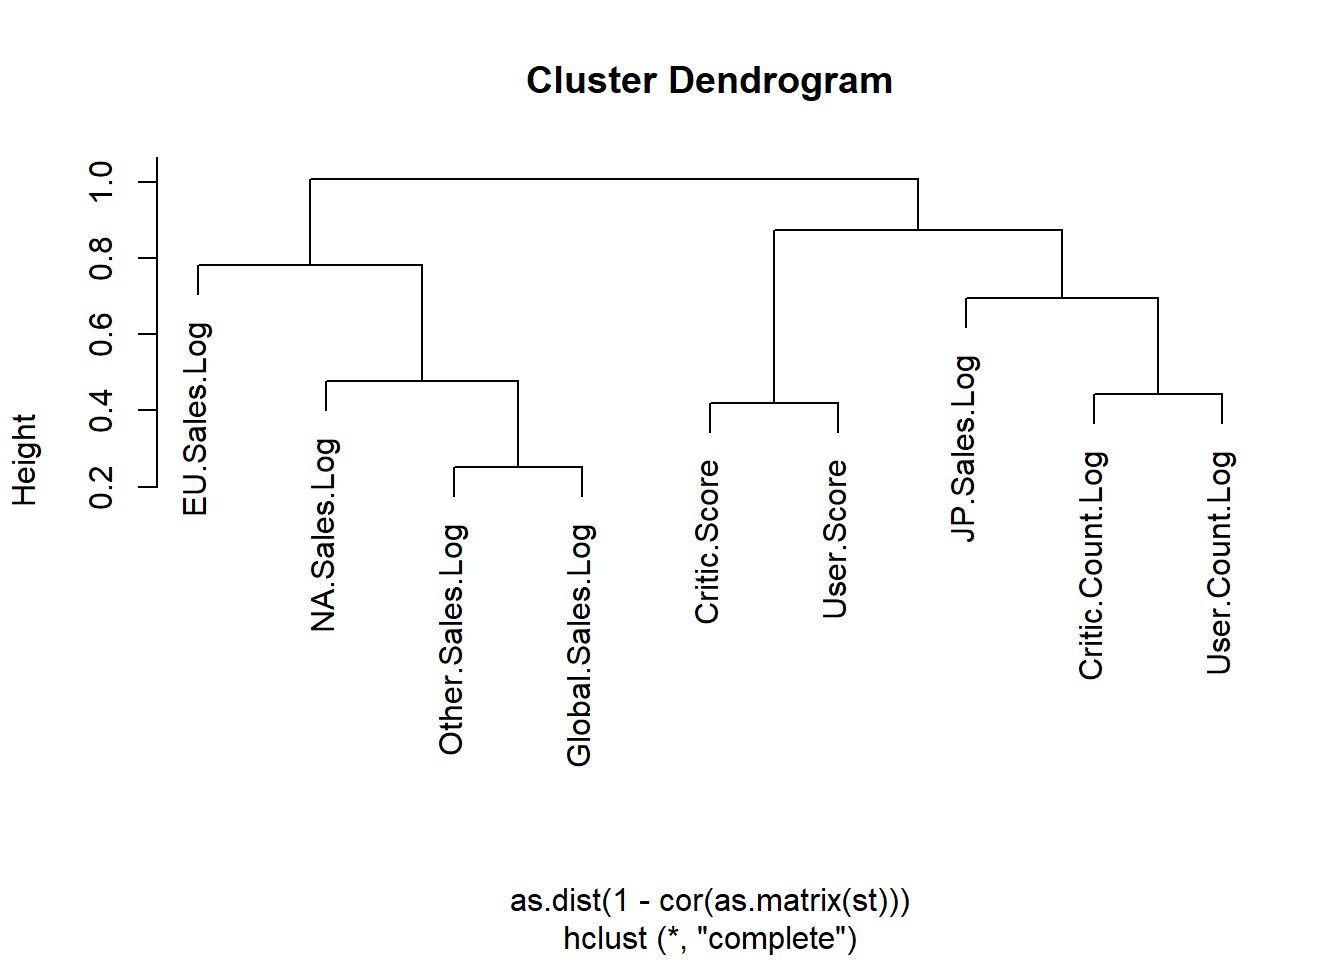 Exercise dendrogram for numeric variables.